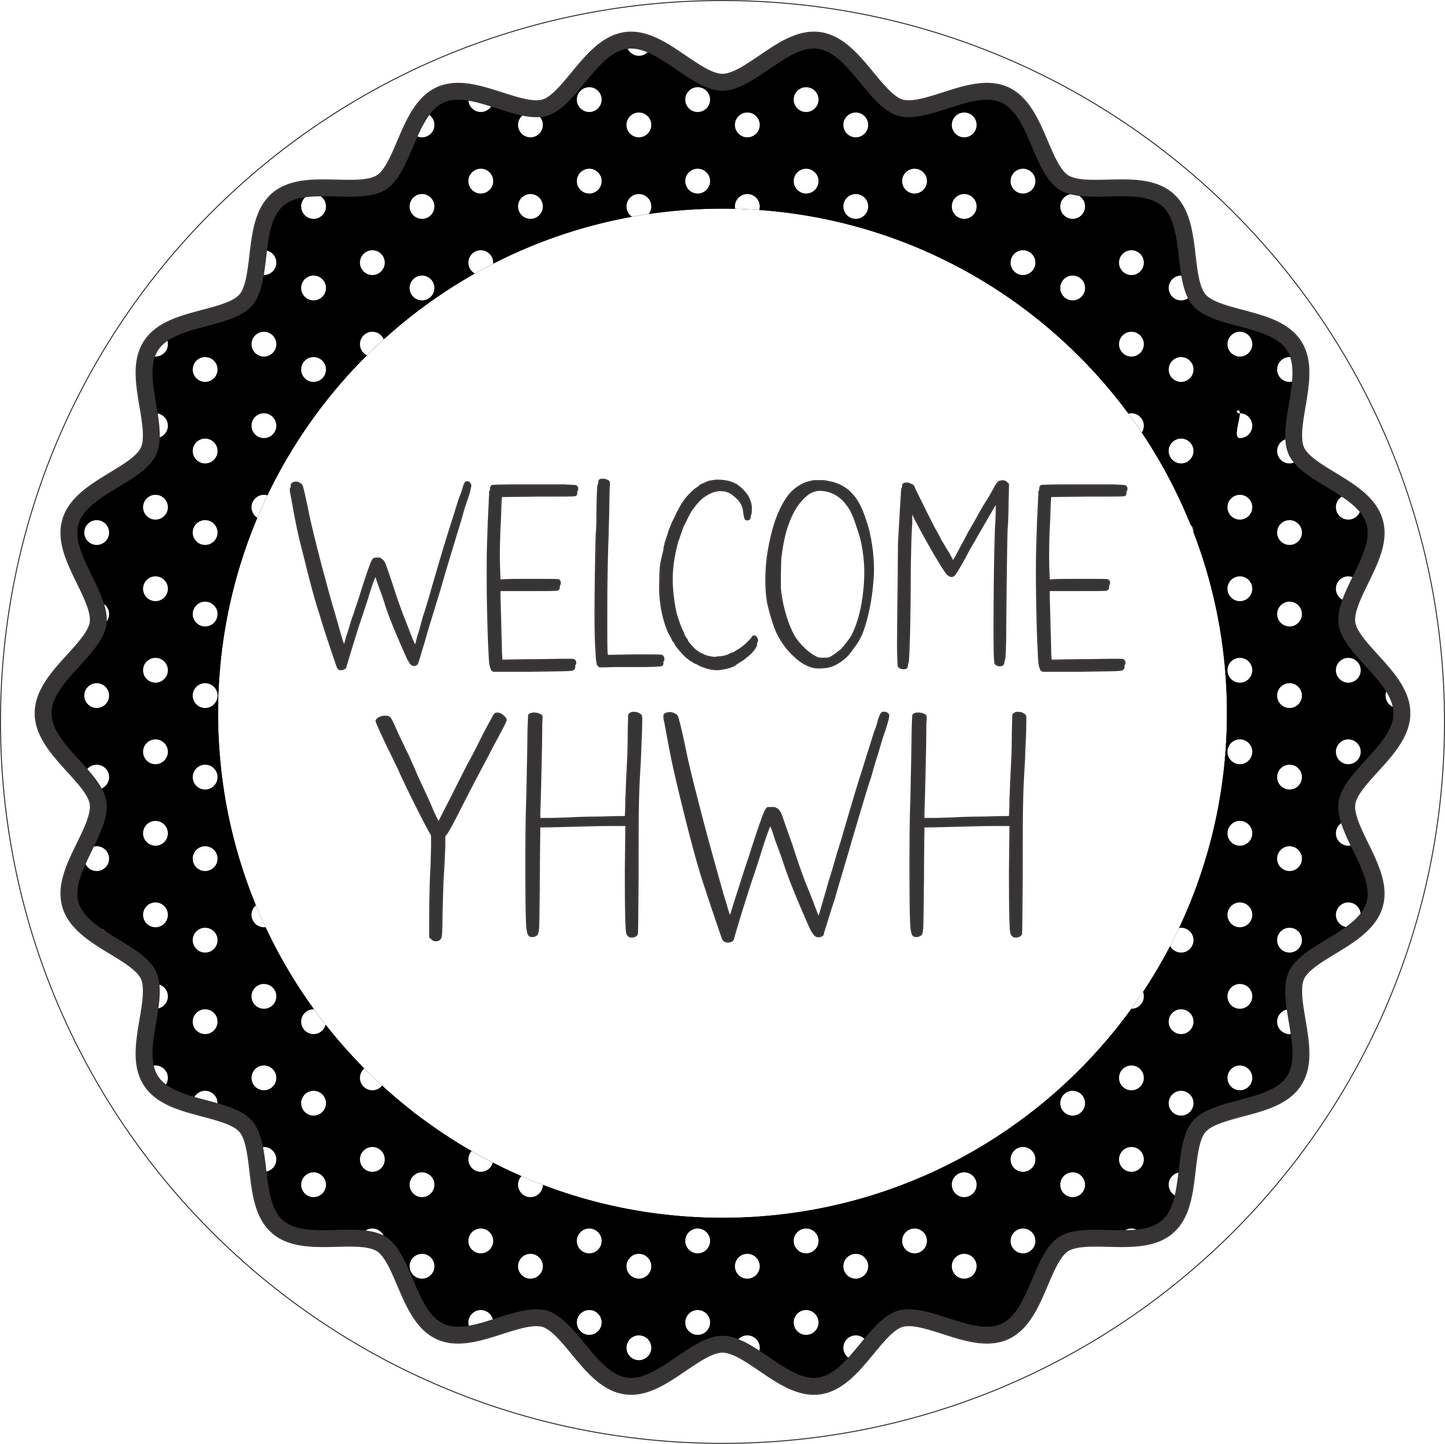 White and Black Welcome YHWH- Welcome Yahwah wreath Sign Round